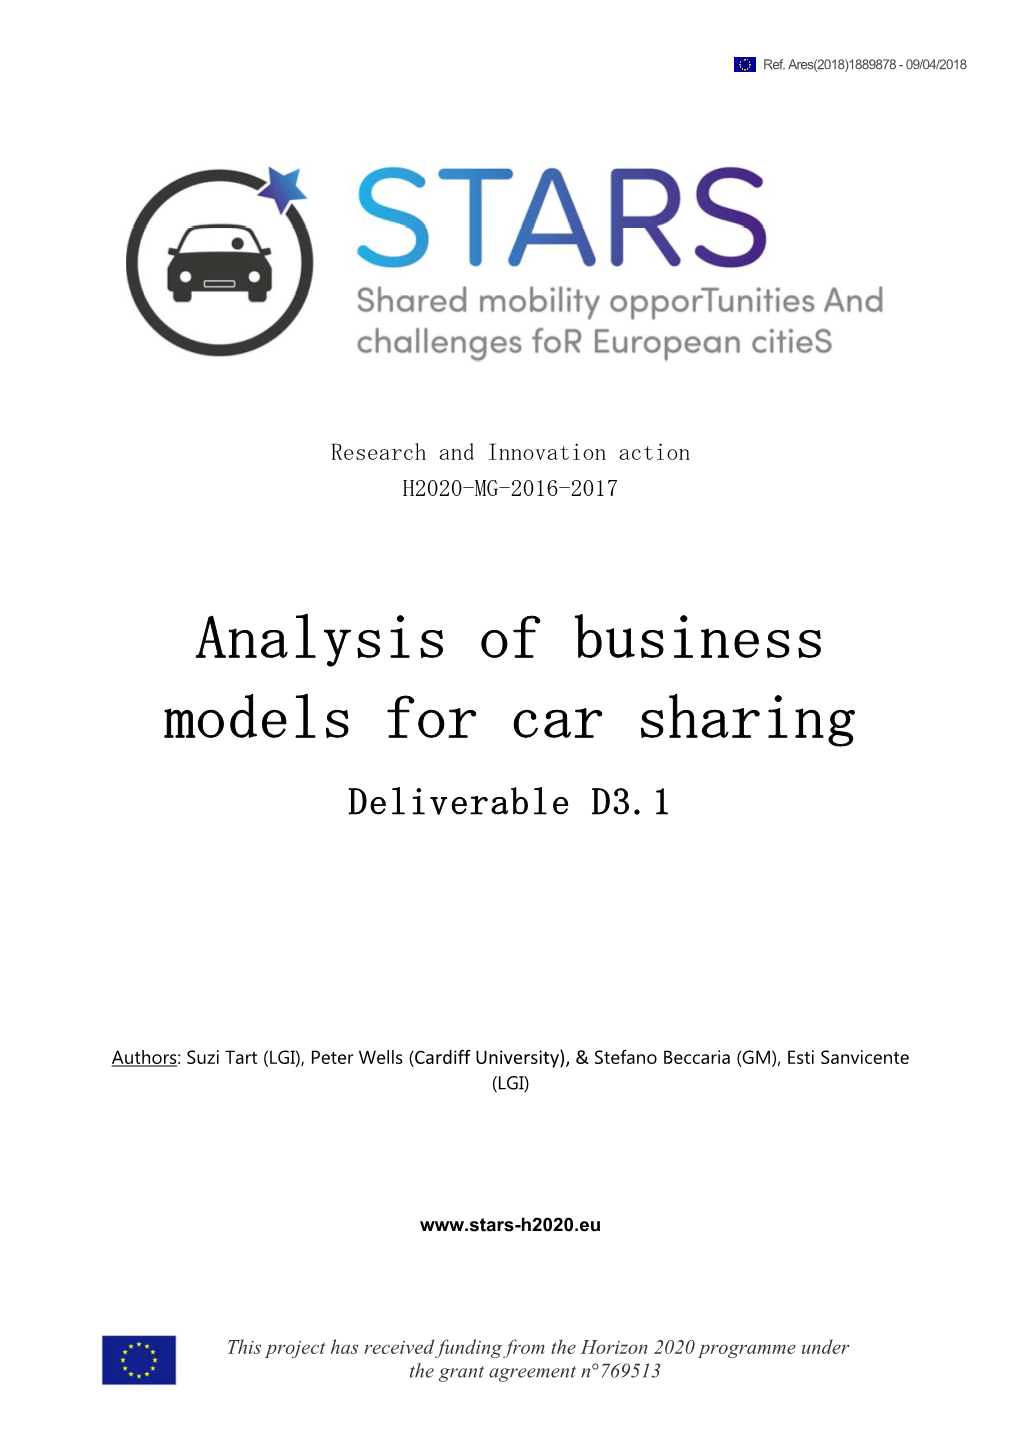 D3.1 Analysis of Business Models for Car Sharing